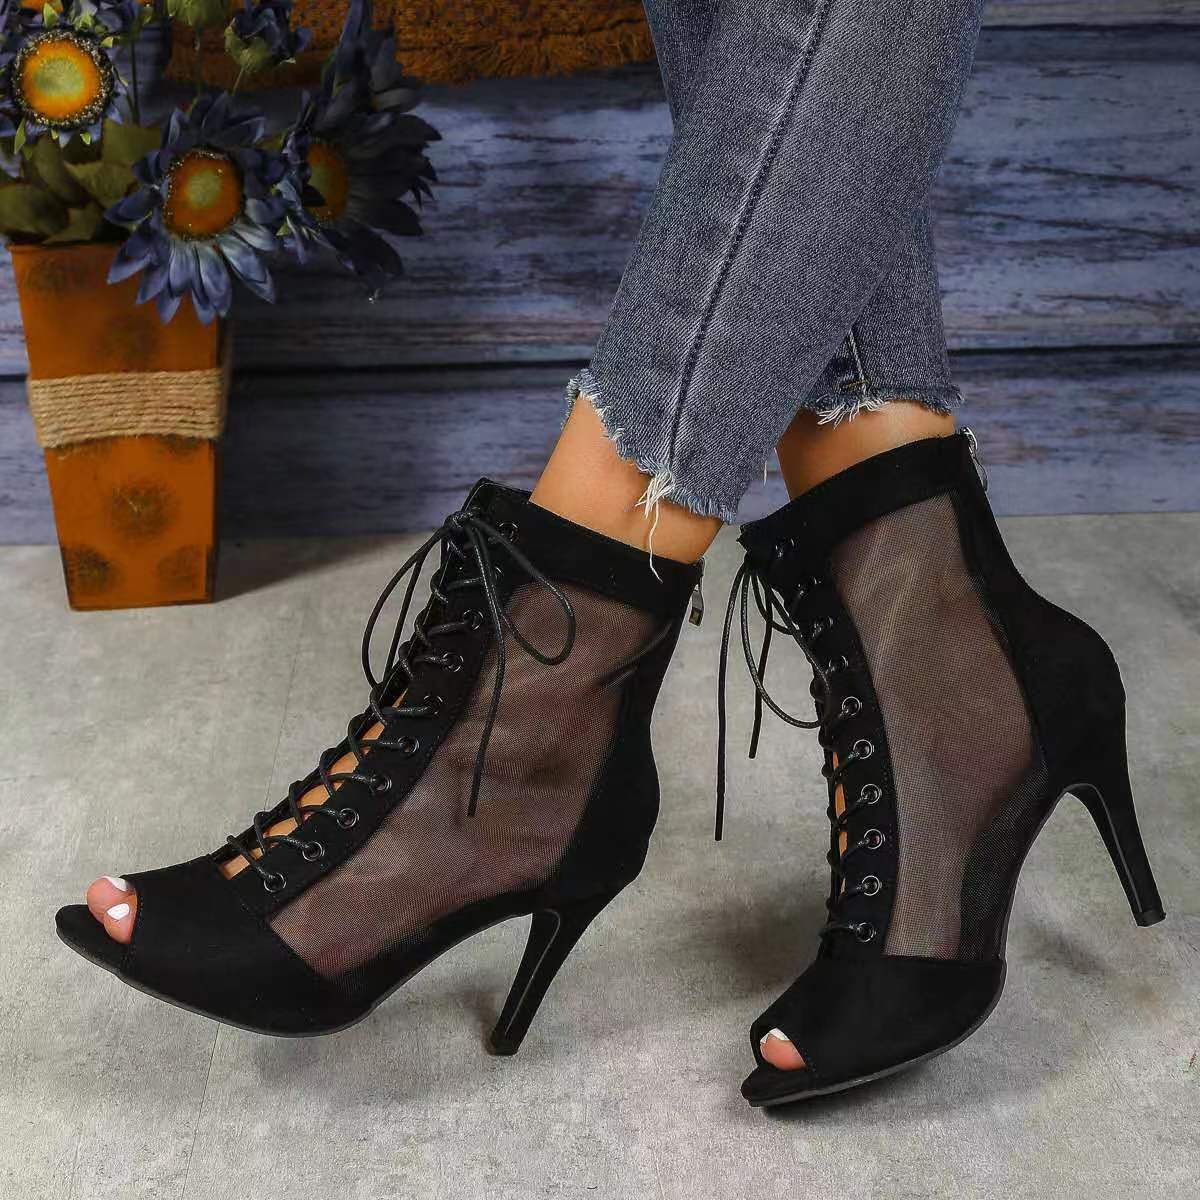 Mesh Fish Mouth Sandal Boots Female Stiletto Heel High Sandals